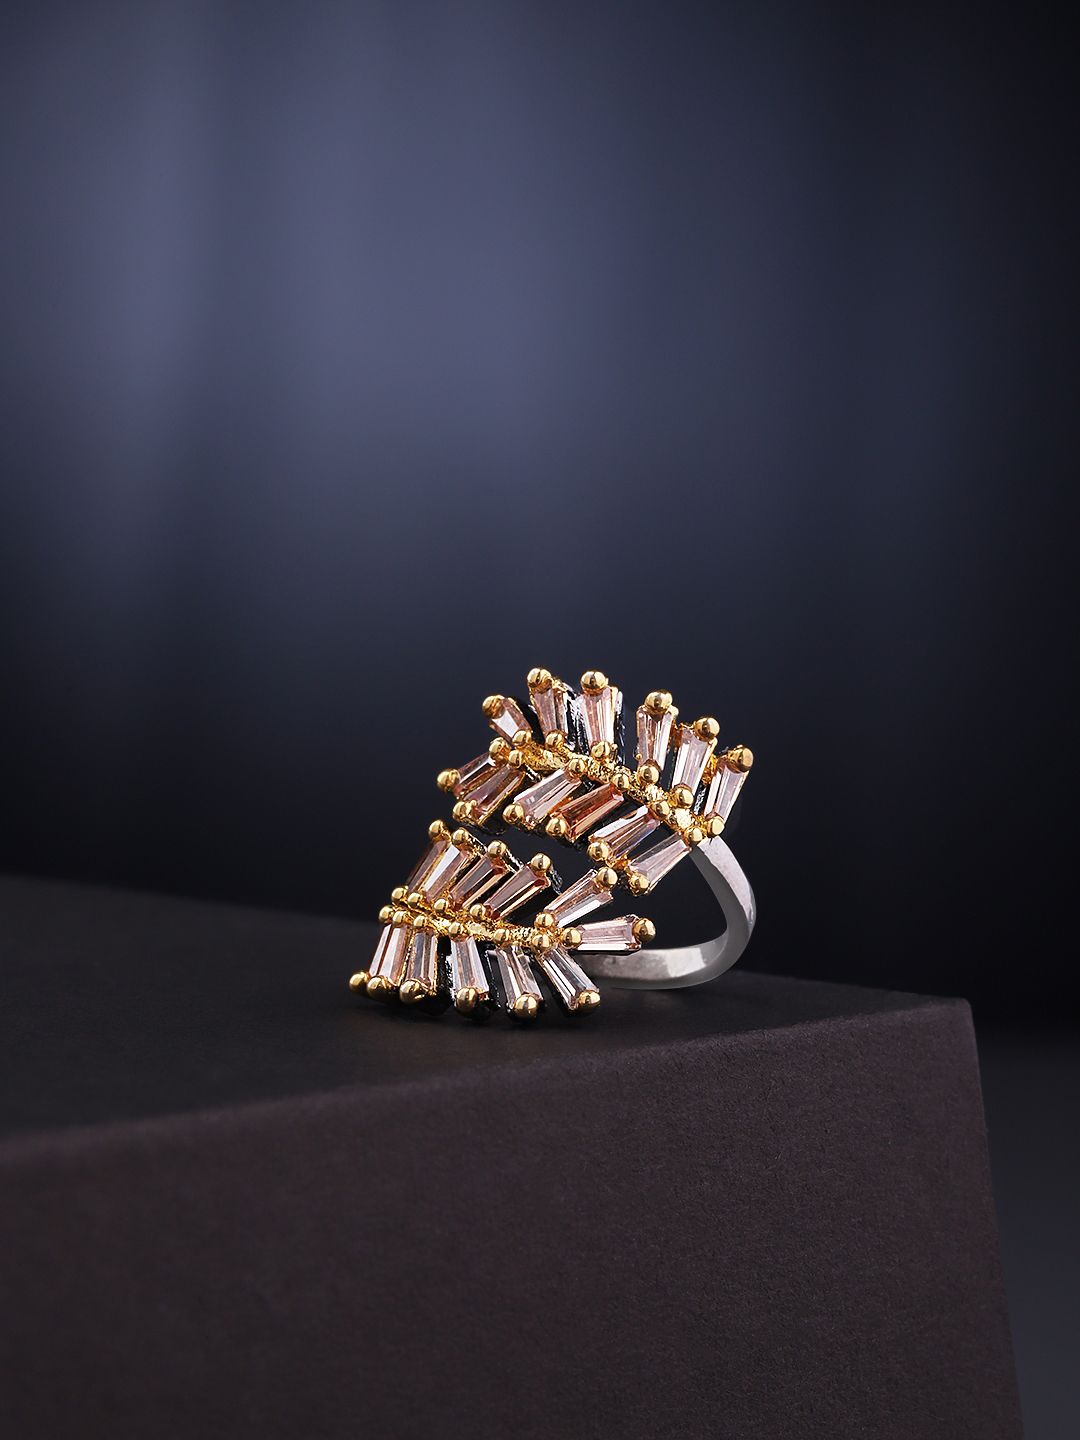 Priyaasi Silver-Plated & Gold-Toned CZ Studded Leaf Shaped Adjustable Ring Price in India